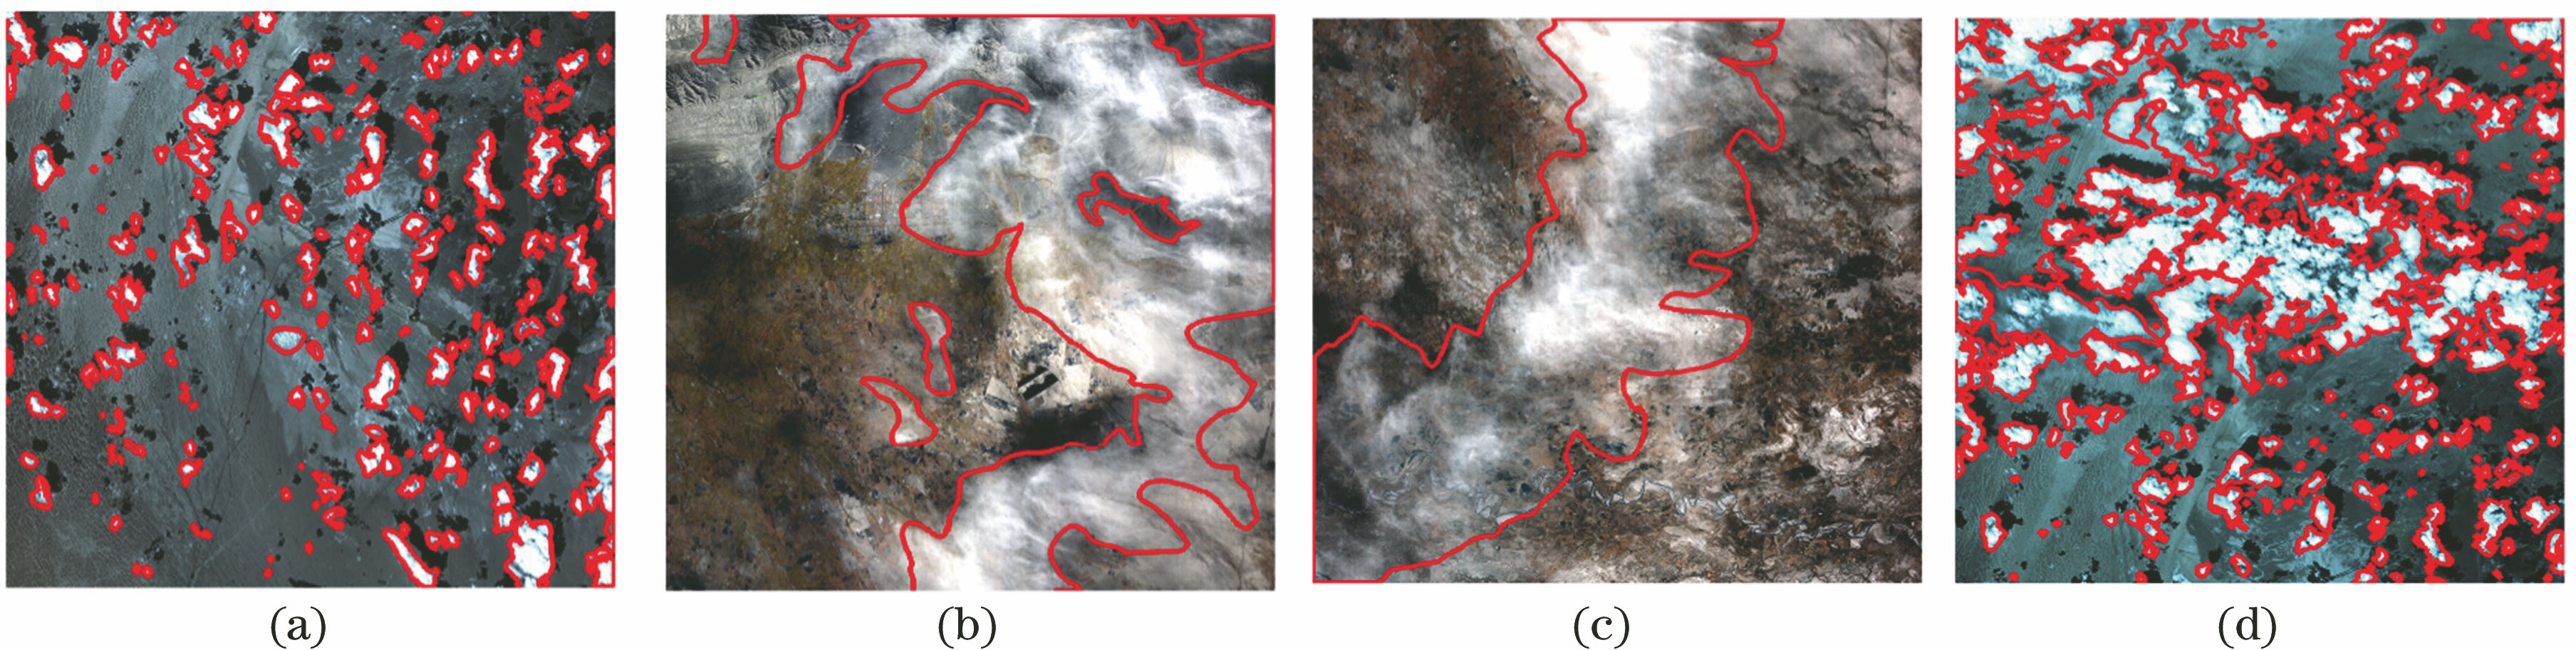 Hyperspectral images of cloud detection areas (false color composite image of bands 110, 64, 44 in RGB, the red vector is the visually interpreted cloud boundary). (a) Image a; (b) image b; (c) image c; (d) image d